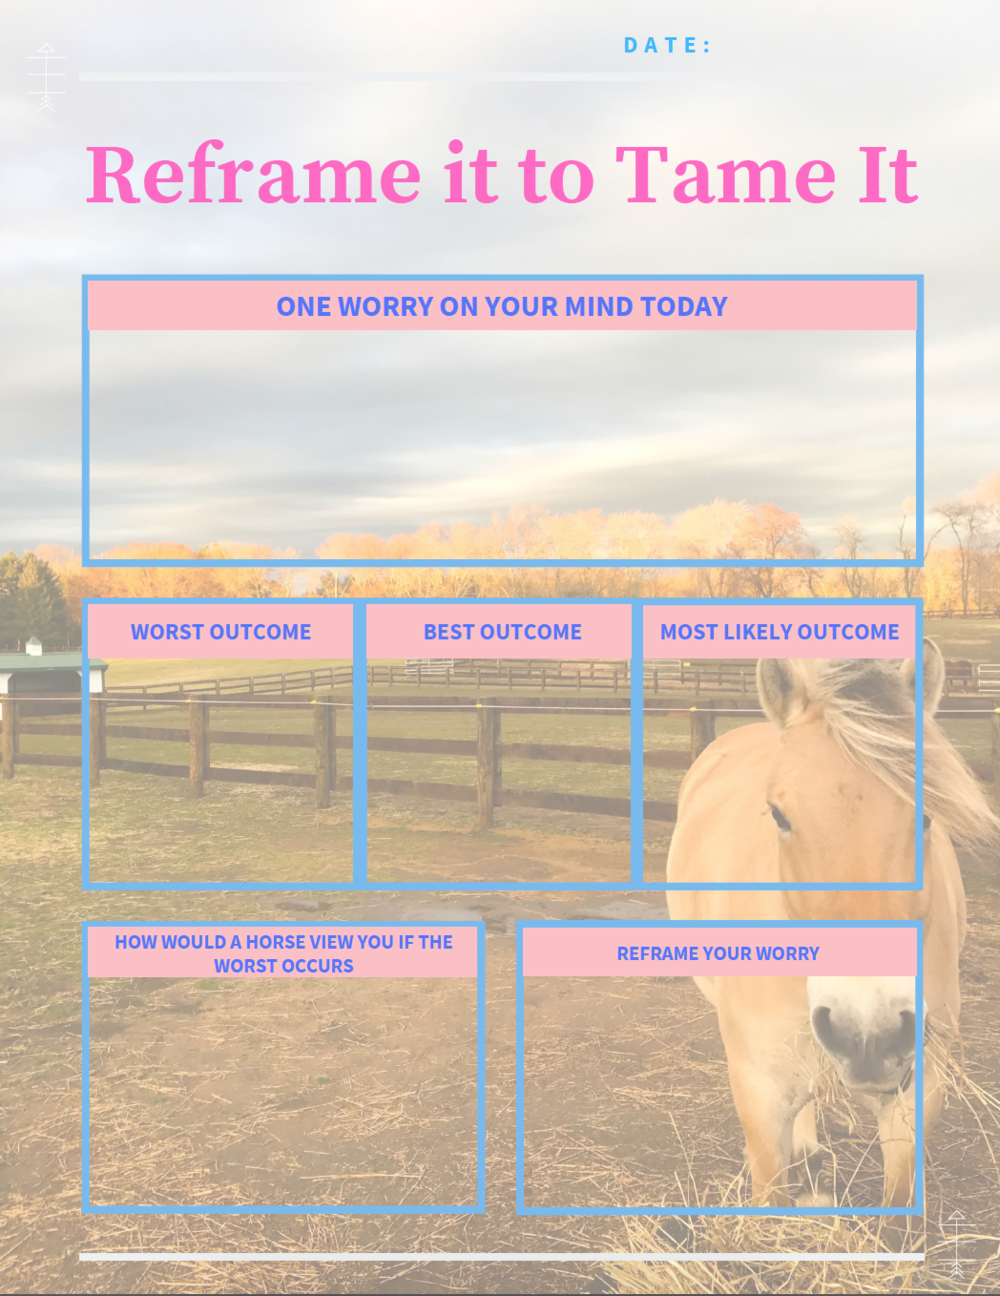 Reframe it to Tame it